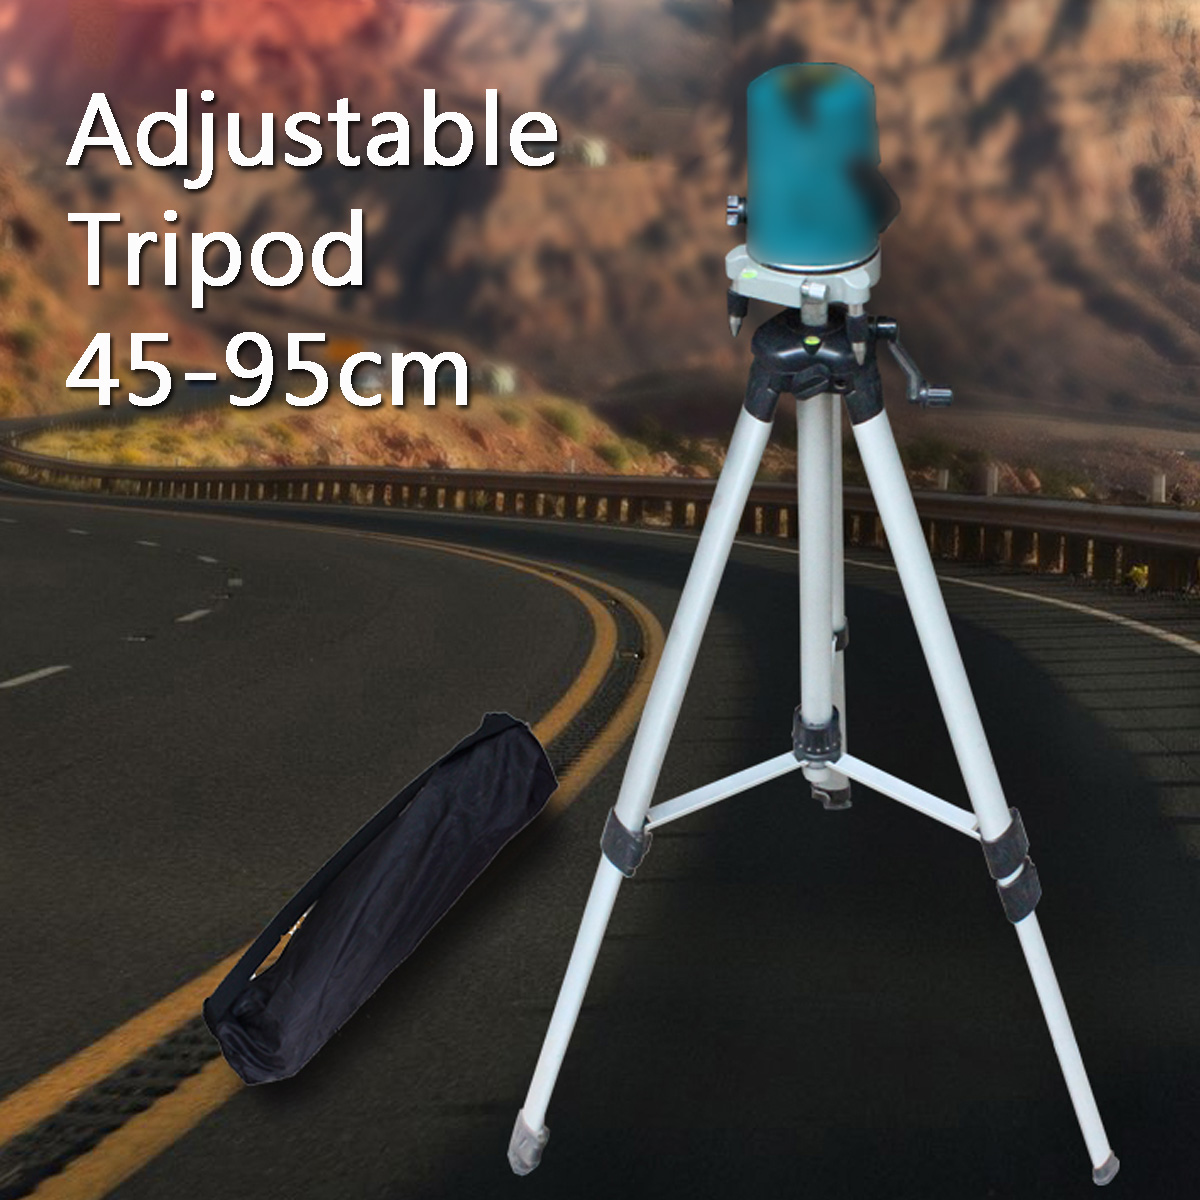 Professional-Tripod-Adjustable-for-Rotary-Laser-Leveling-Measuring-Tool-Instruments-Line-Level-Exten-1616473-2